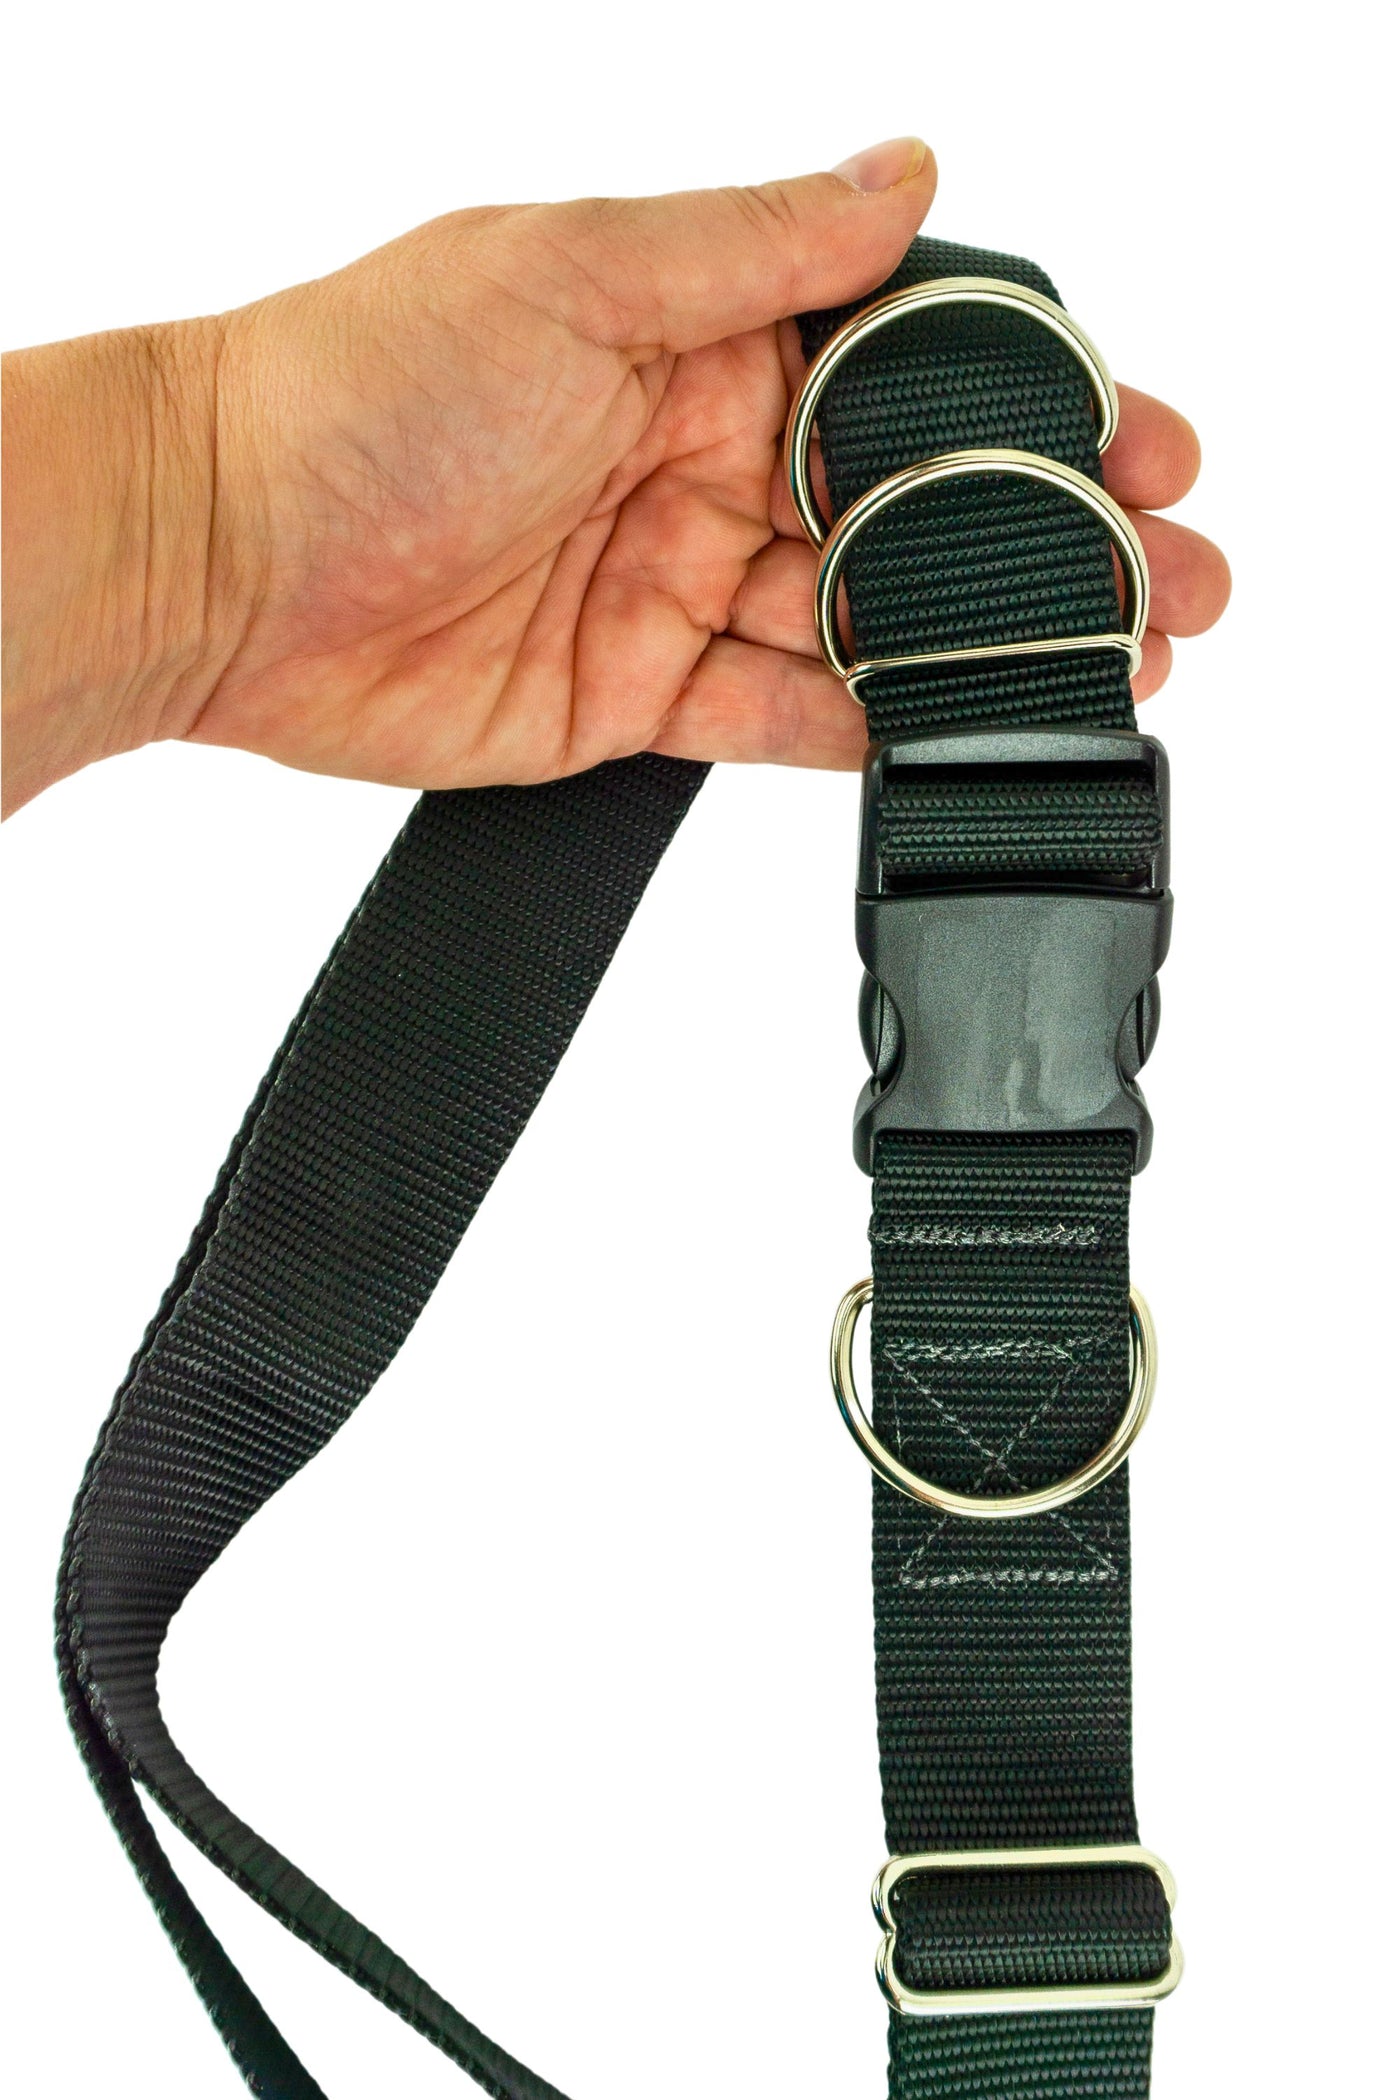 Medium weight hands free leash belt held in the hand of an adult to show the scale of the belt hardware.